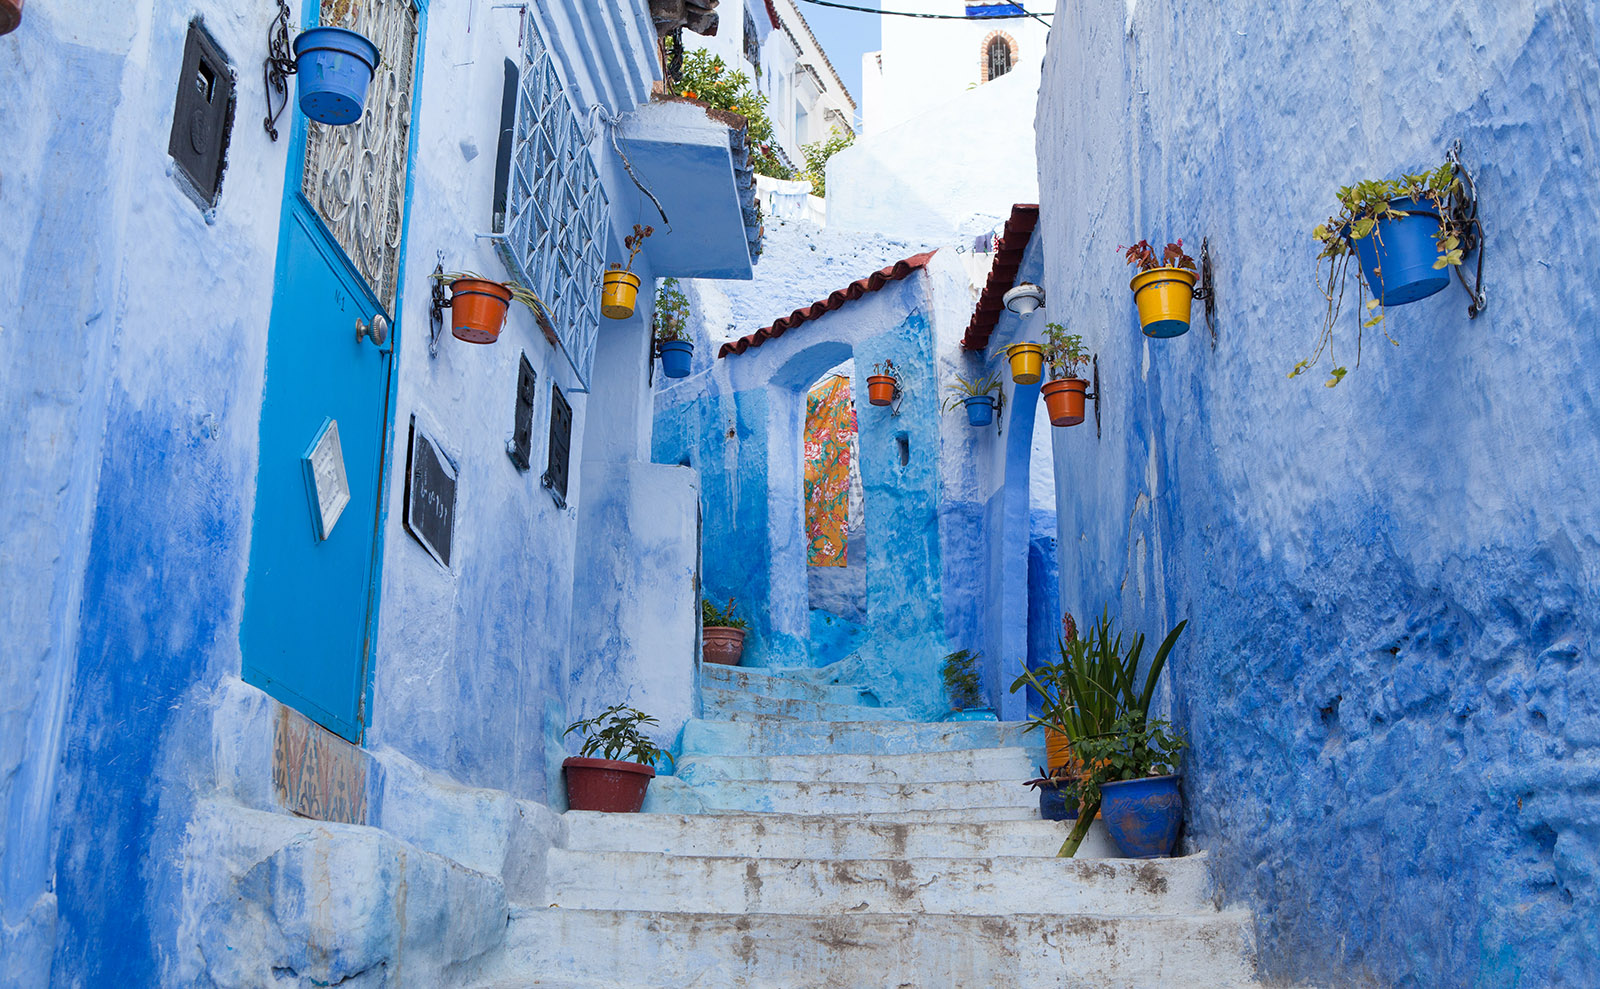 Chefchaouen, George Smiley, Europe Hikes, Bookish Hotels & More: Endnotes 05 January